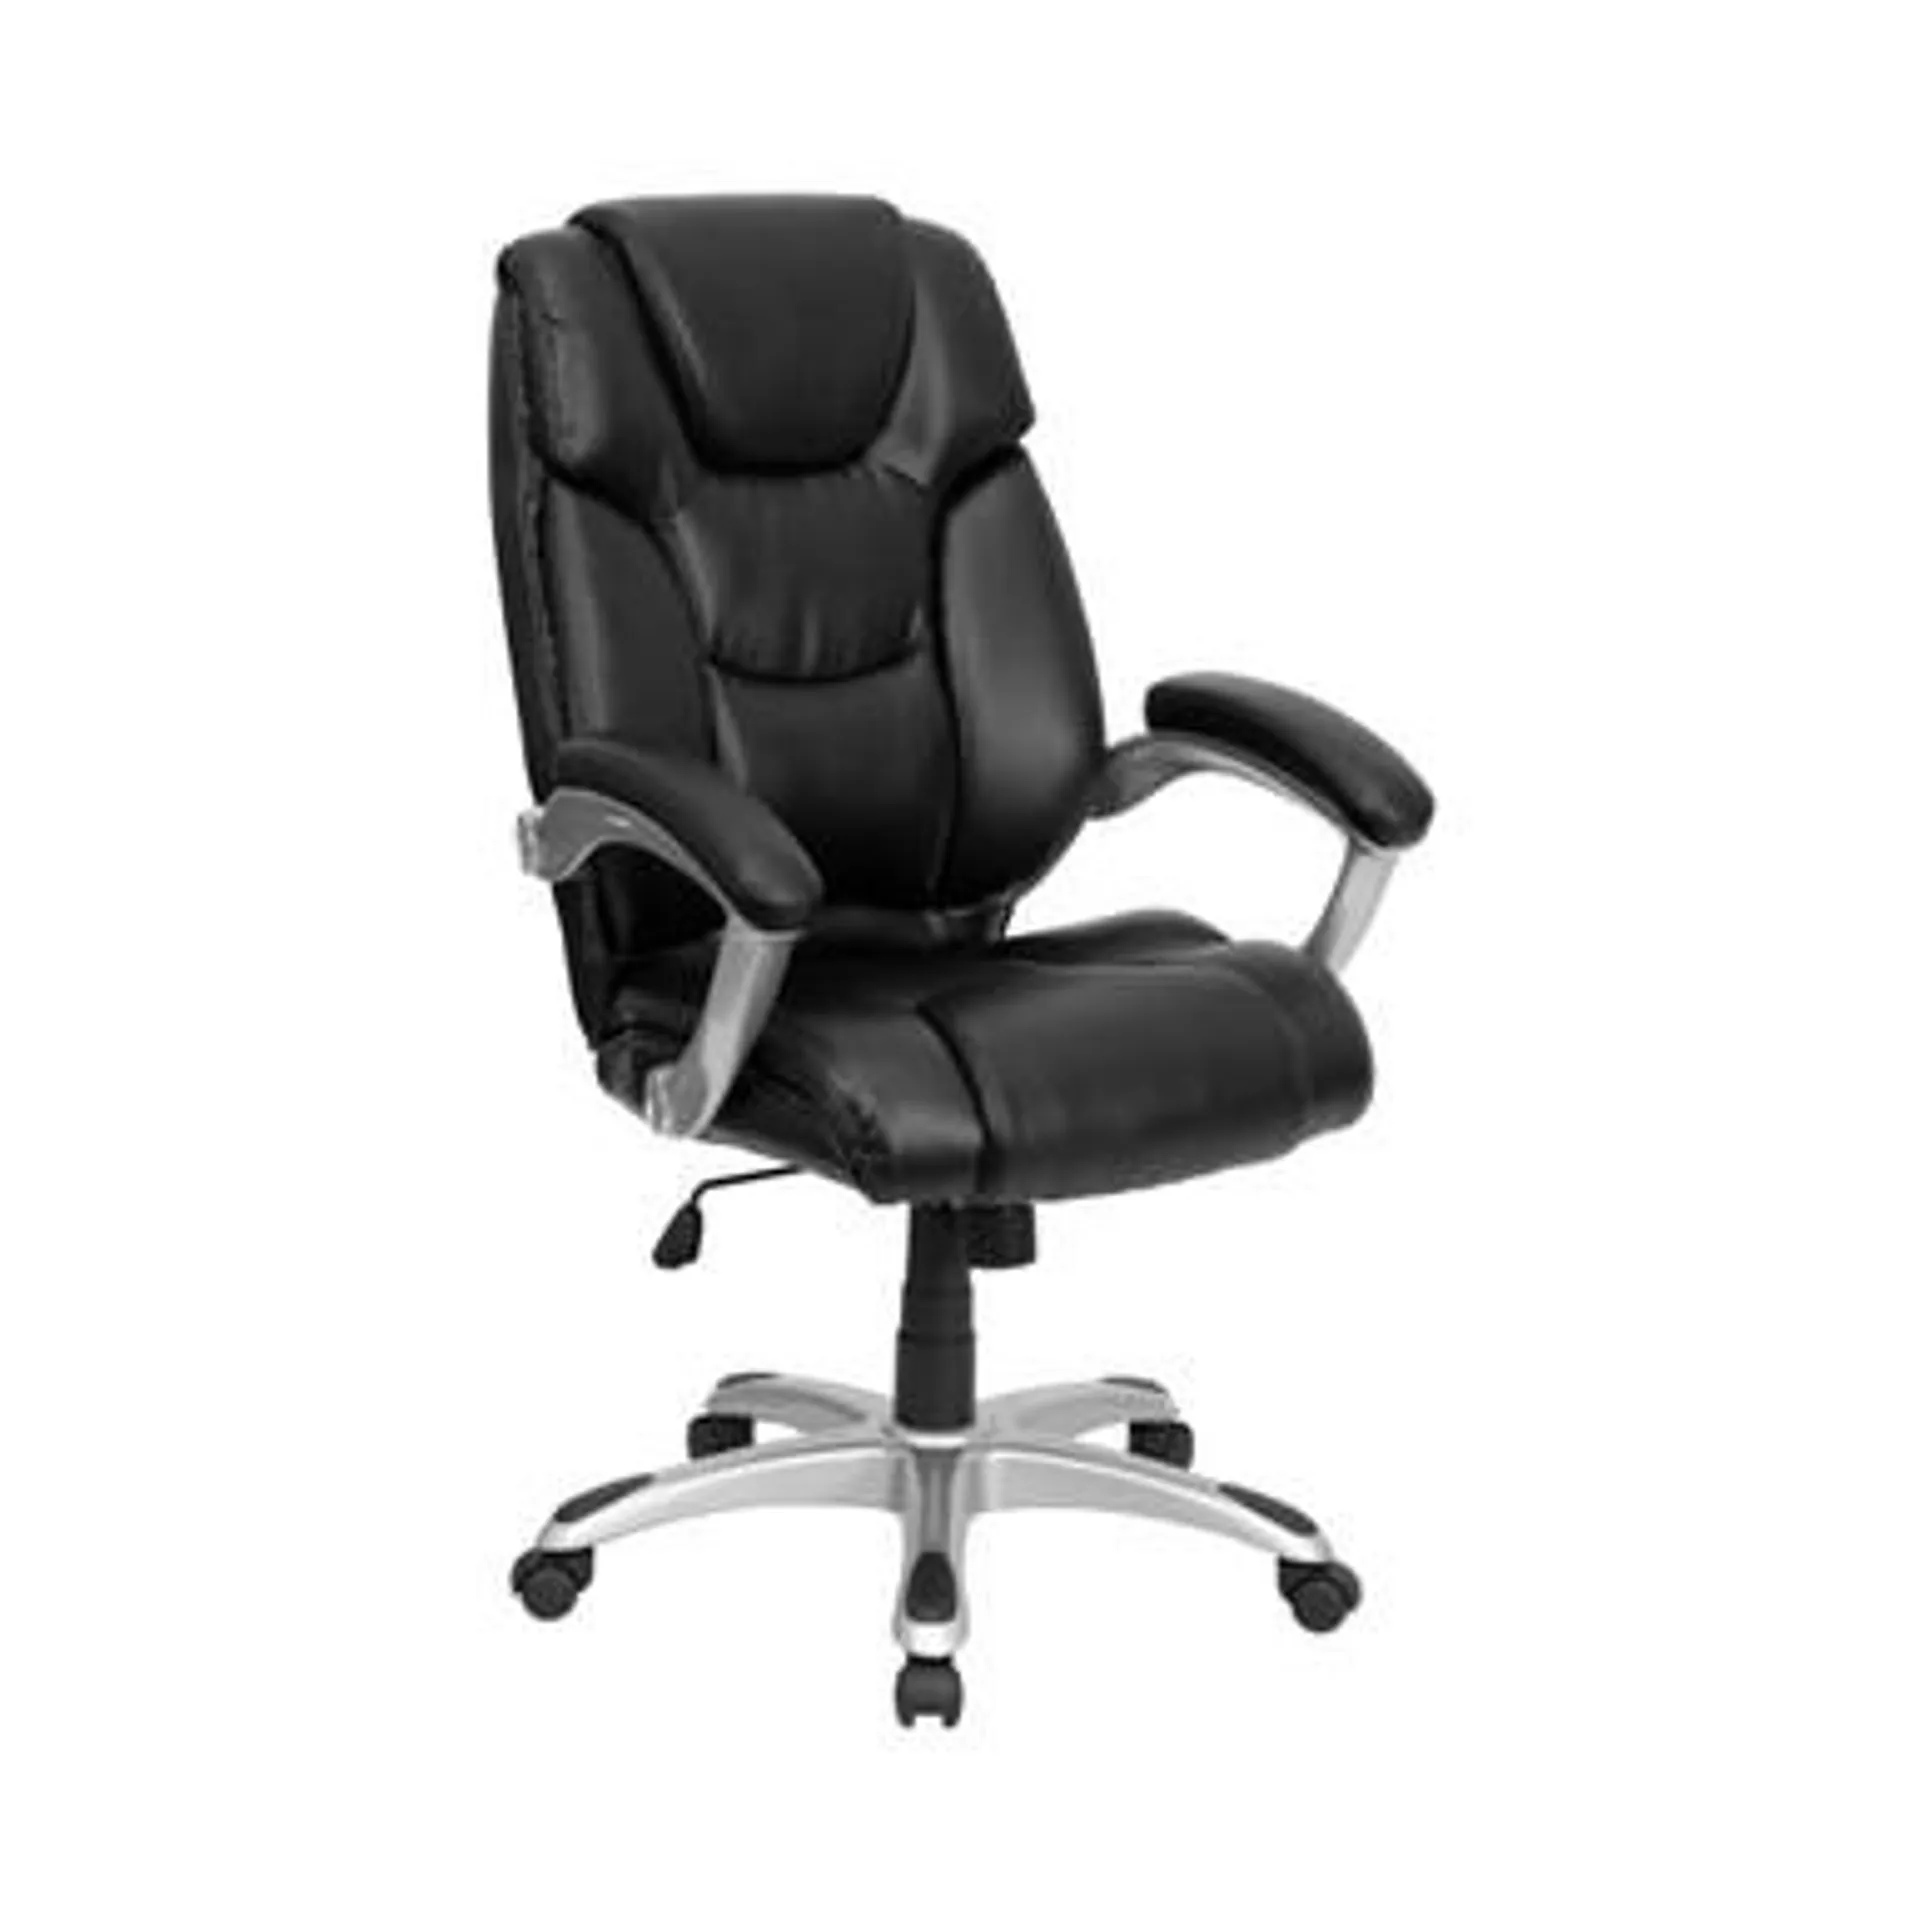 High Back Black LeatherSoft Layered Upholstered Executive Swivel Ergonomic Chair with Silver Nylon Base and Arms